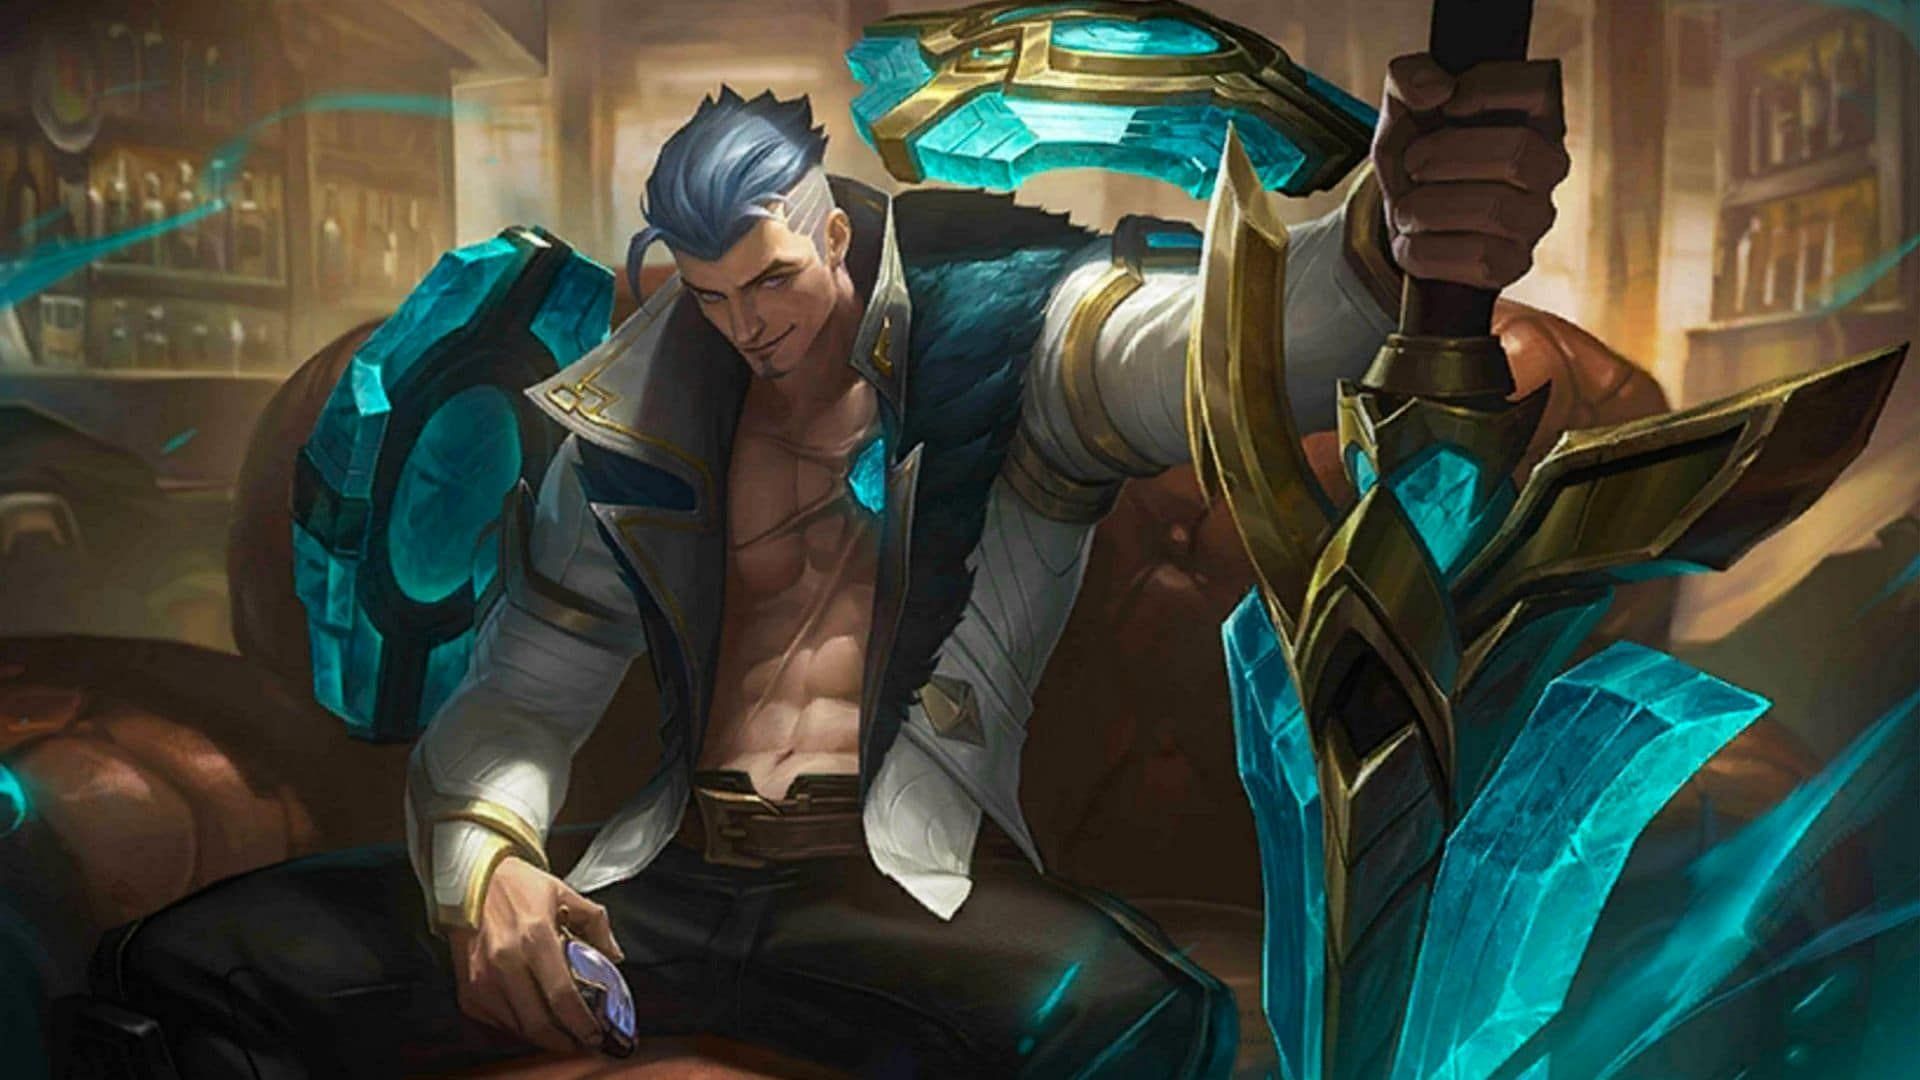 Fredrinn receives some buffs in the latest MLBB patch update (Image via Moonton Games)